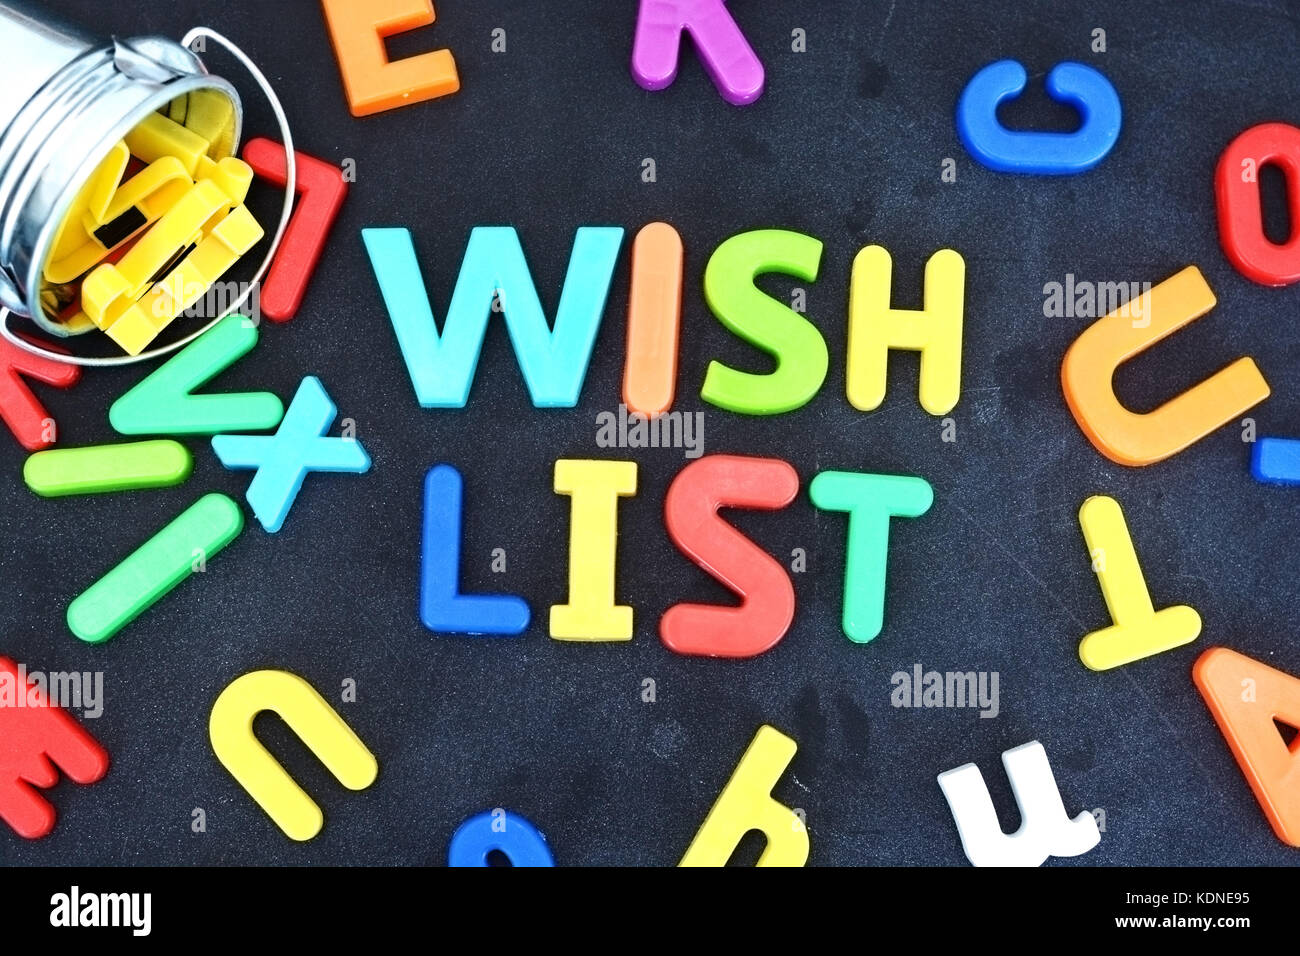 Wish list concept with colorful letters on blackboard pouring out from a metallic bucket Stock Photo